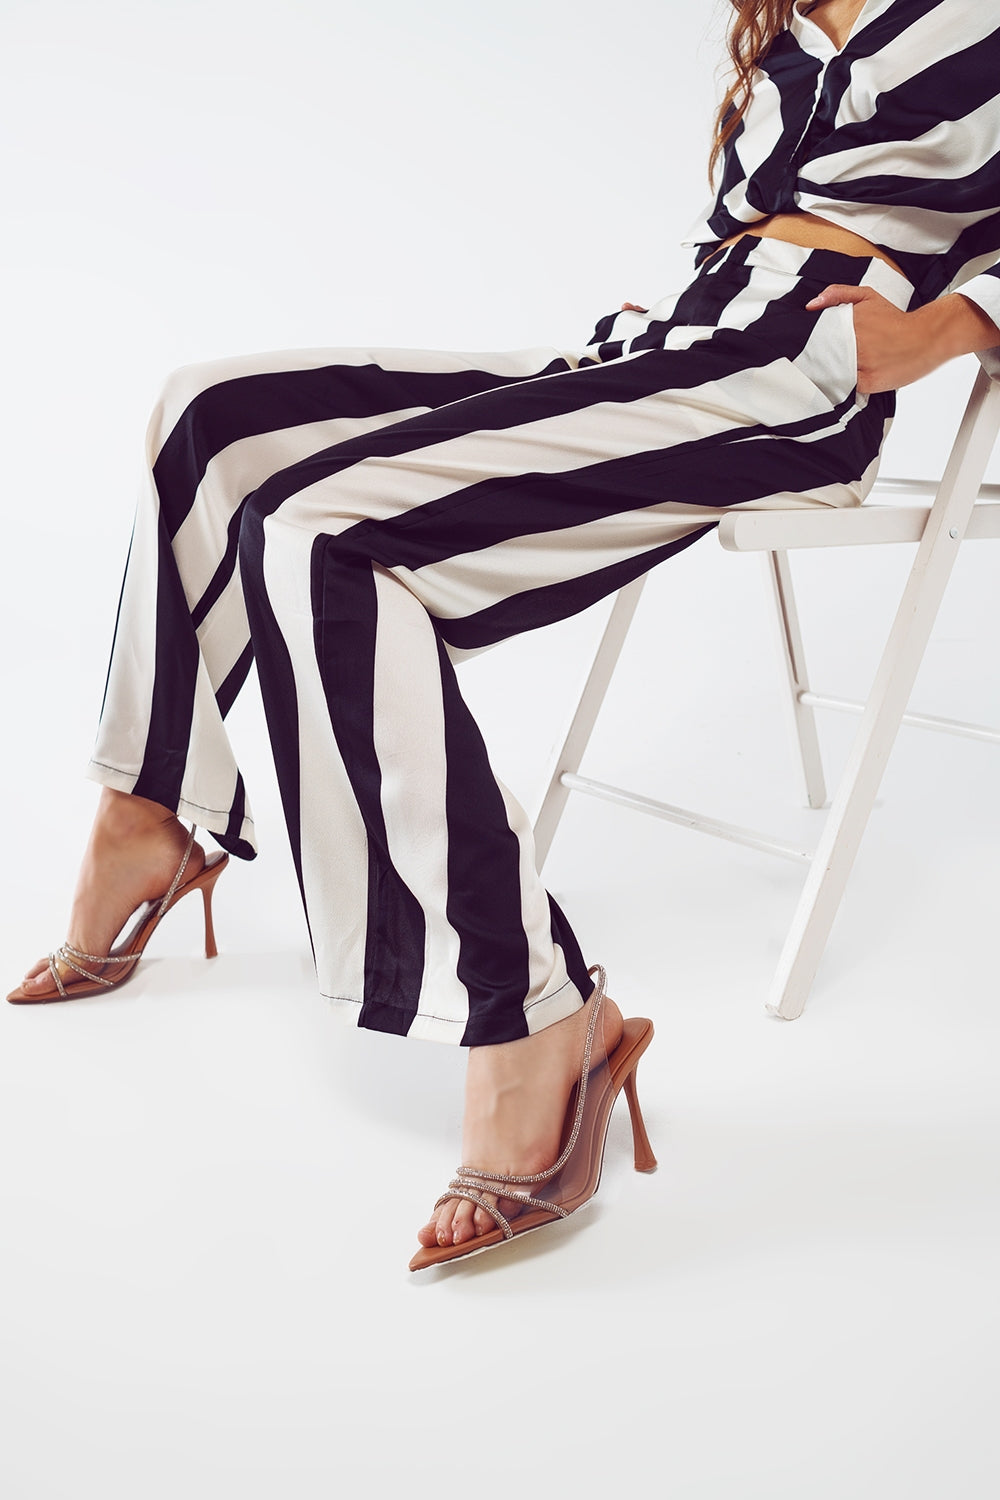 Q2 Straight Pants Stripe design and Relaxed fit in Black and White